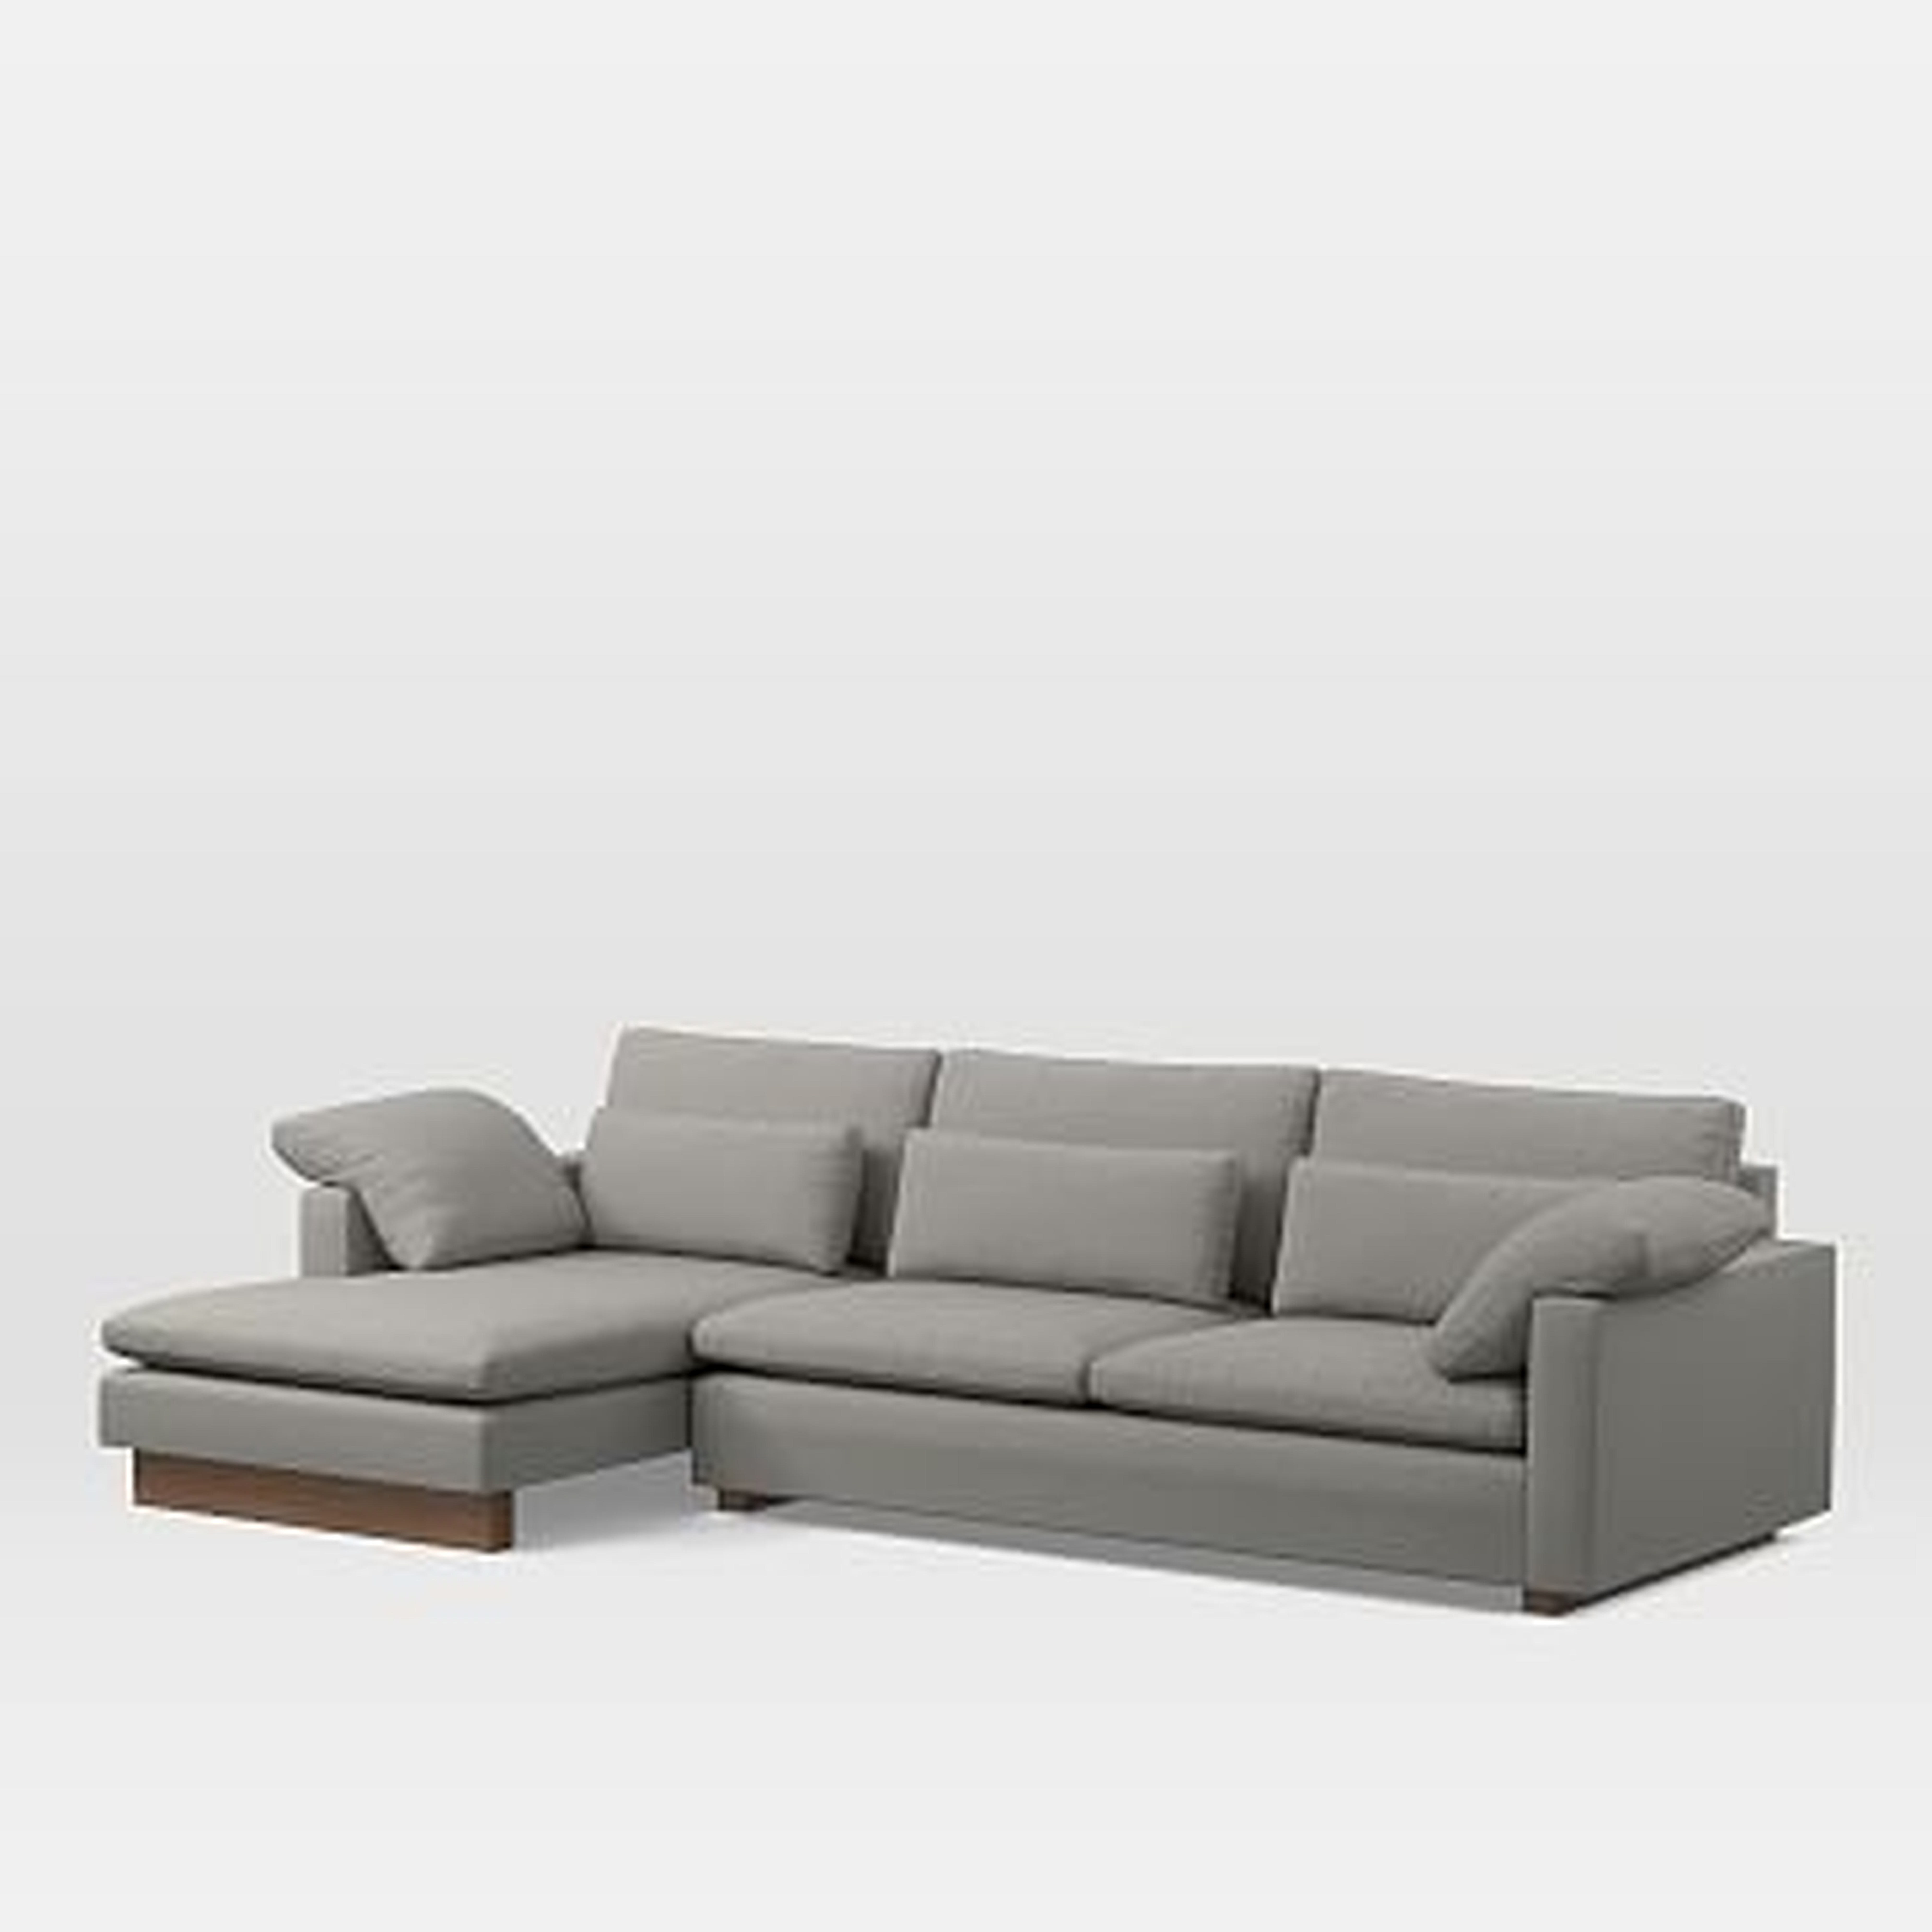 Harmony Sectional Set 10: Right Arm 2 Seater Sofa, Left Arm Chaise, Down Blend, Twill, Silver, Walnut - West Elm